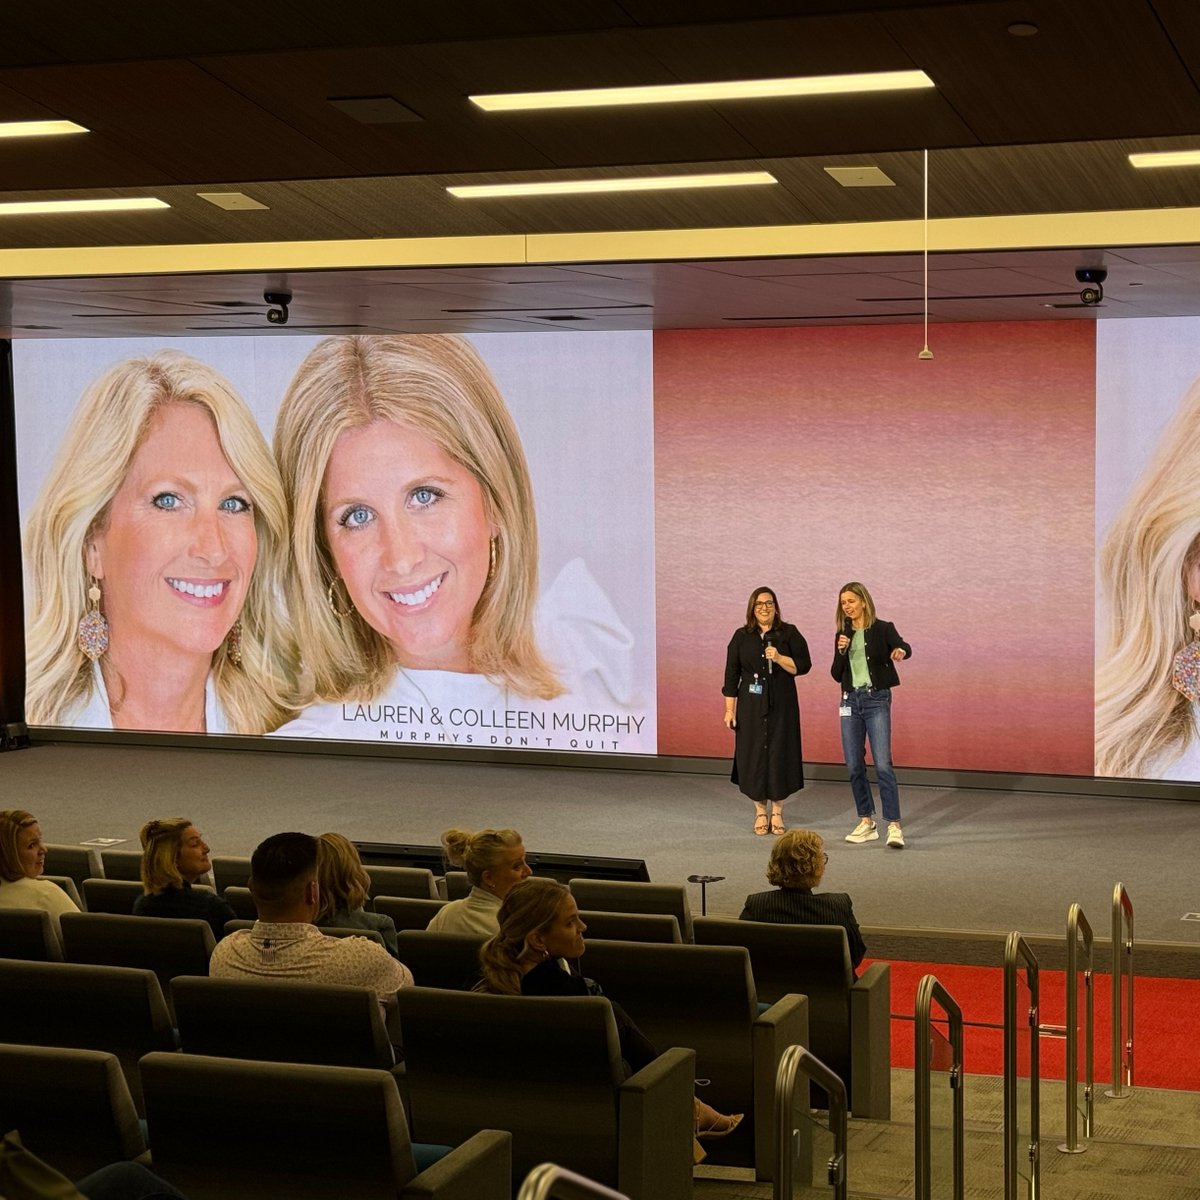 Colleen & Lauren Murphy of @murphysdontquit spent the morning with us at GHQ, sharing an inspiring story of strength, resilience, and perseverance. #WWTLife 

Watch the event on The Platform
🎥 ms.spr.ly/6014YPKWq